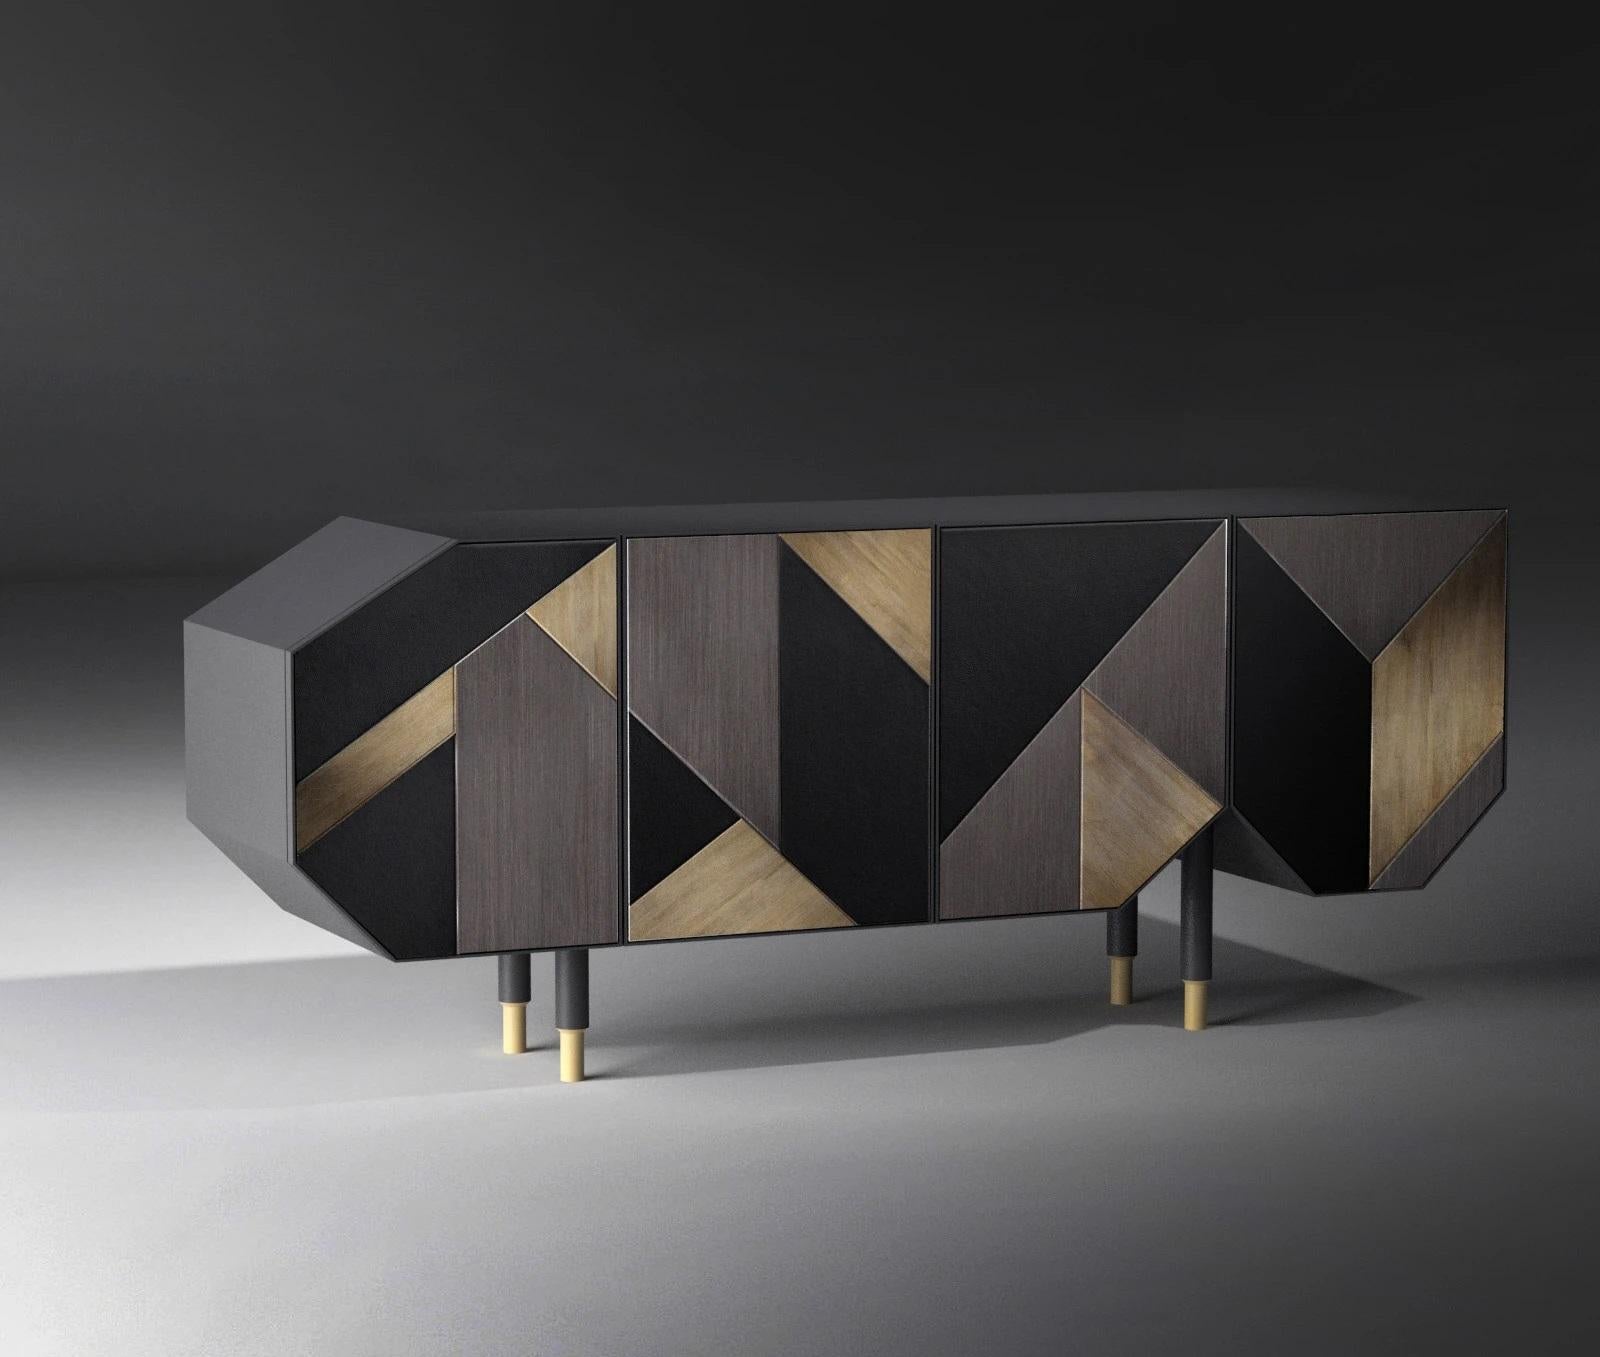 Sideboard constructed with 4 doors in different sizes and shapes as pictured. 
irregular geometric pattern
The doors are inlaid with a mixture of leather, wood and brushed bronze silver leaf in irregular geometric pattern

The legs of this cocktail